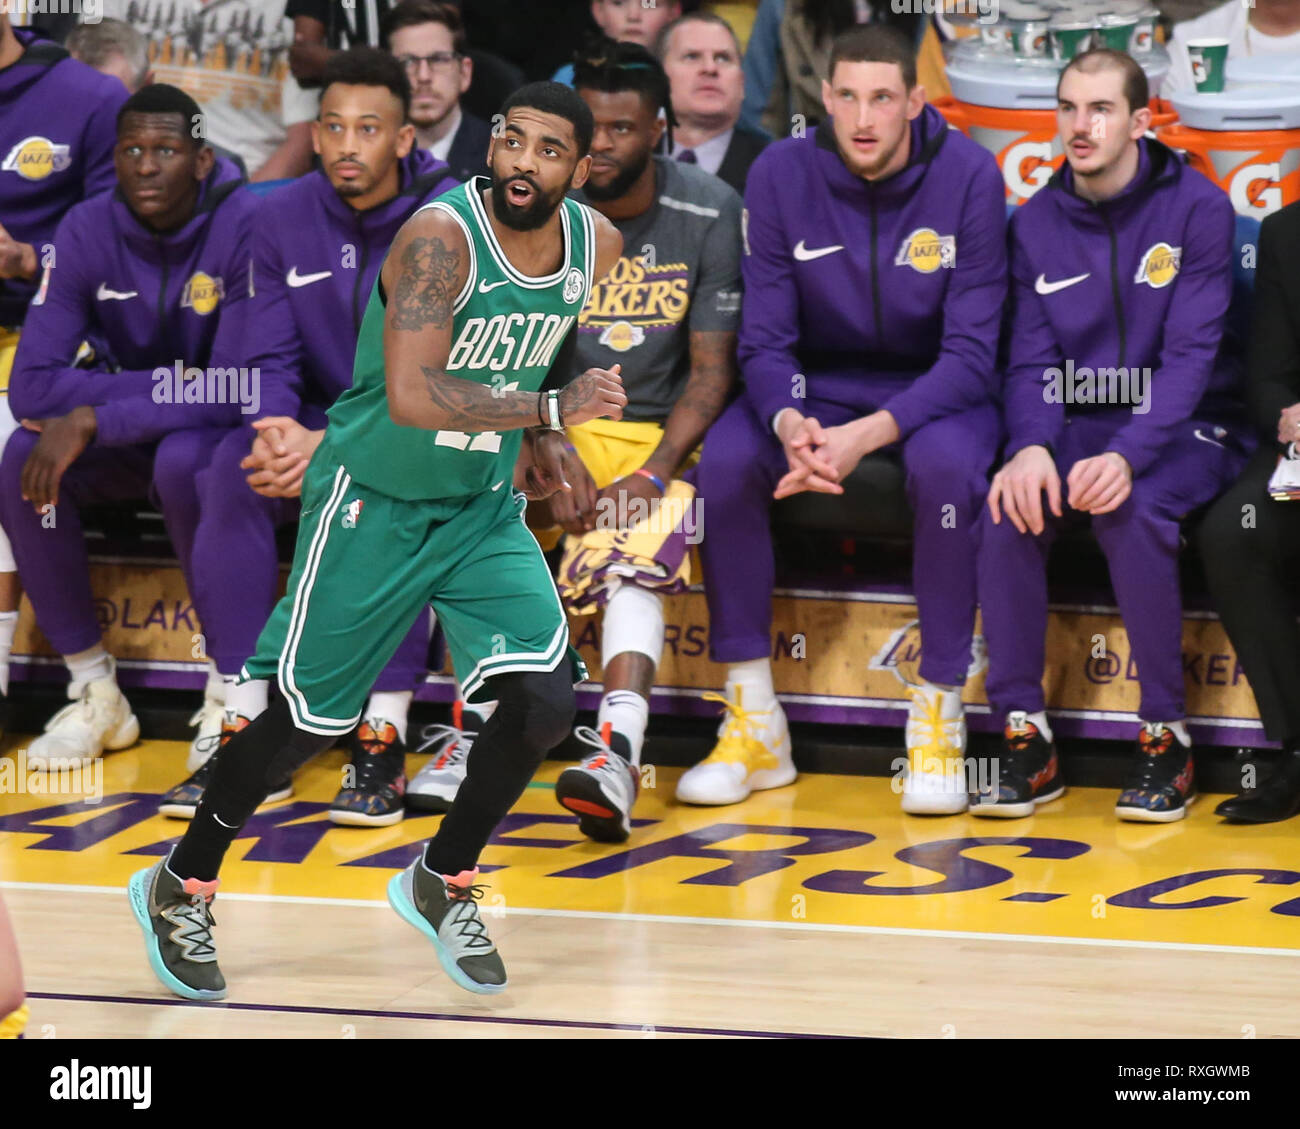 Boston Celtics guard Kyrie Irving #11 during the Boston Celtics vs Los Angeles Lakers game at Staples Center in Los Angeles, CA on March 09, 2019. (Photo by Jevone Moore) Stock Photo